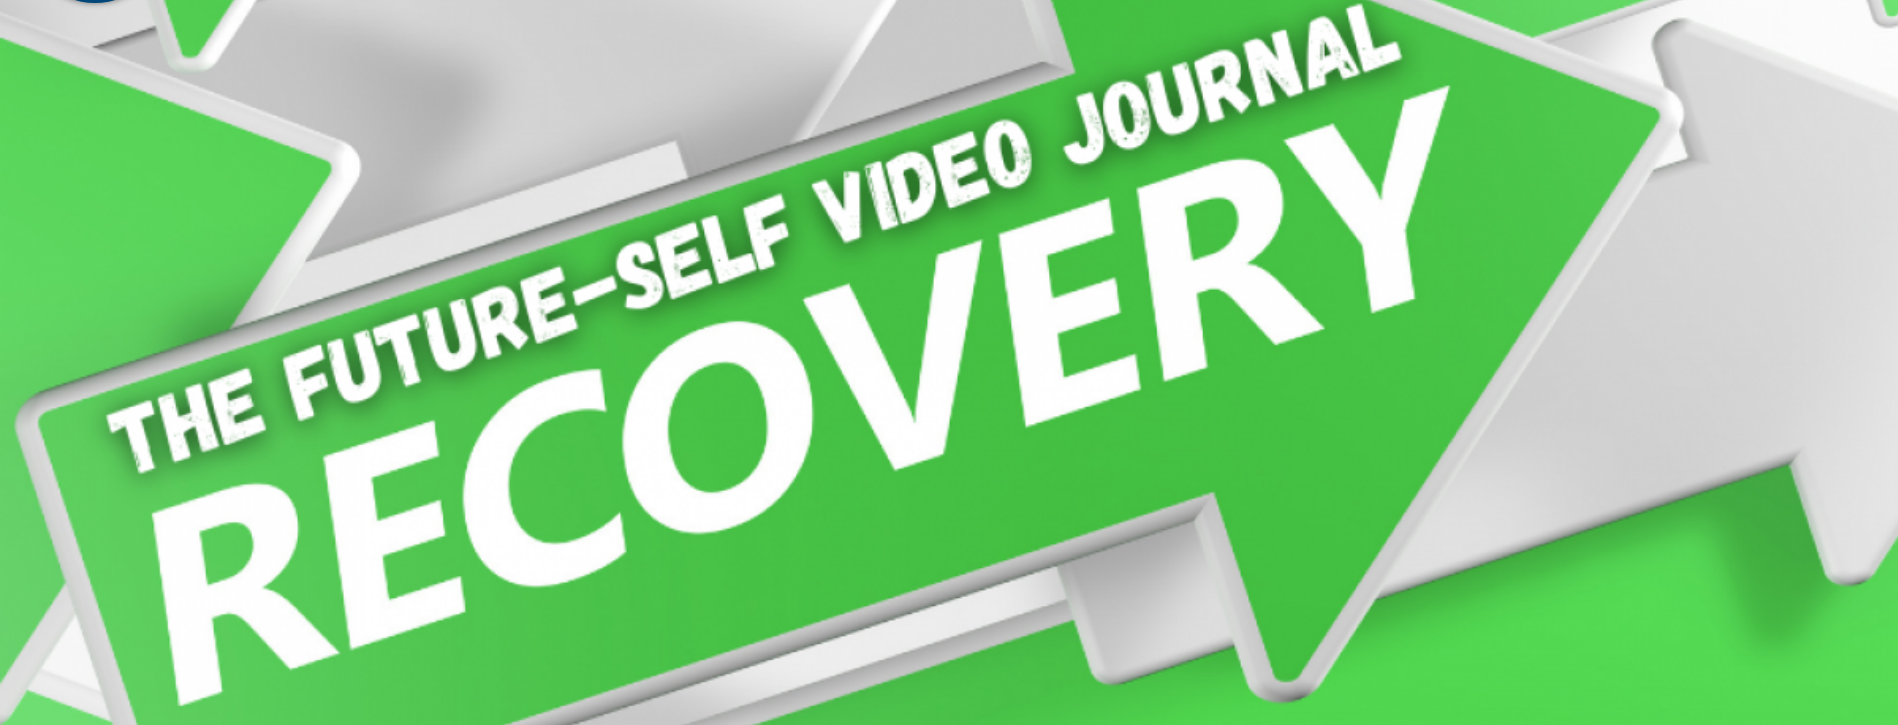 The Future-Self Video Journal For Goal Re-commitment In Recovery Program –  Encapsulator